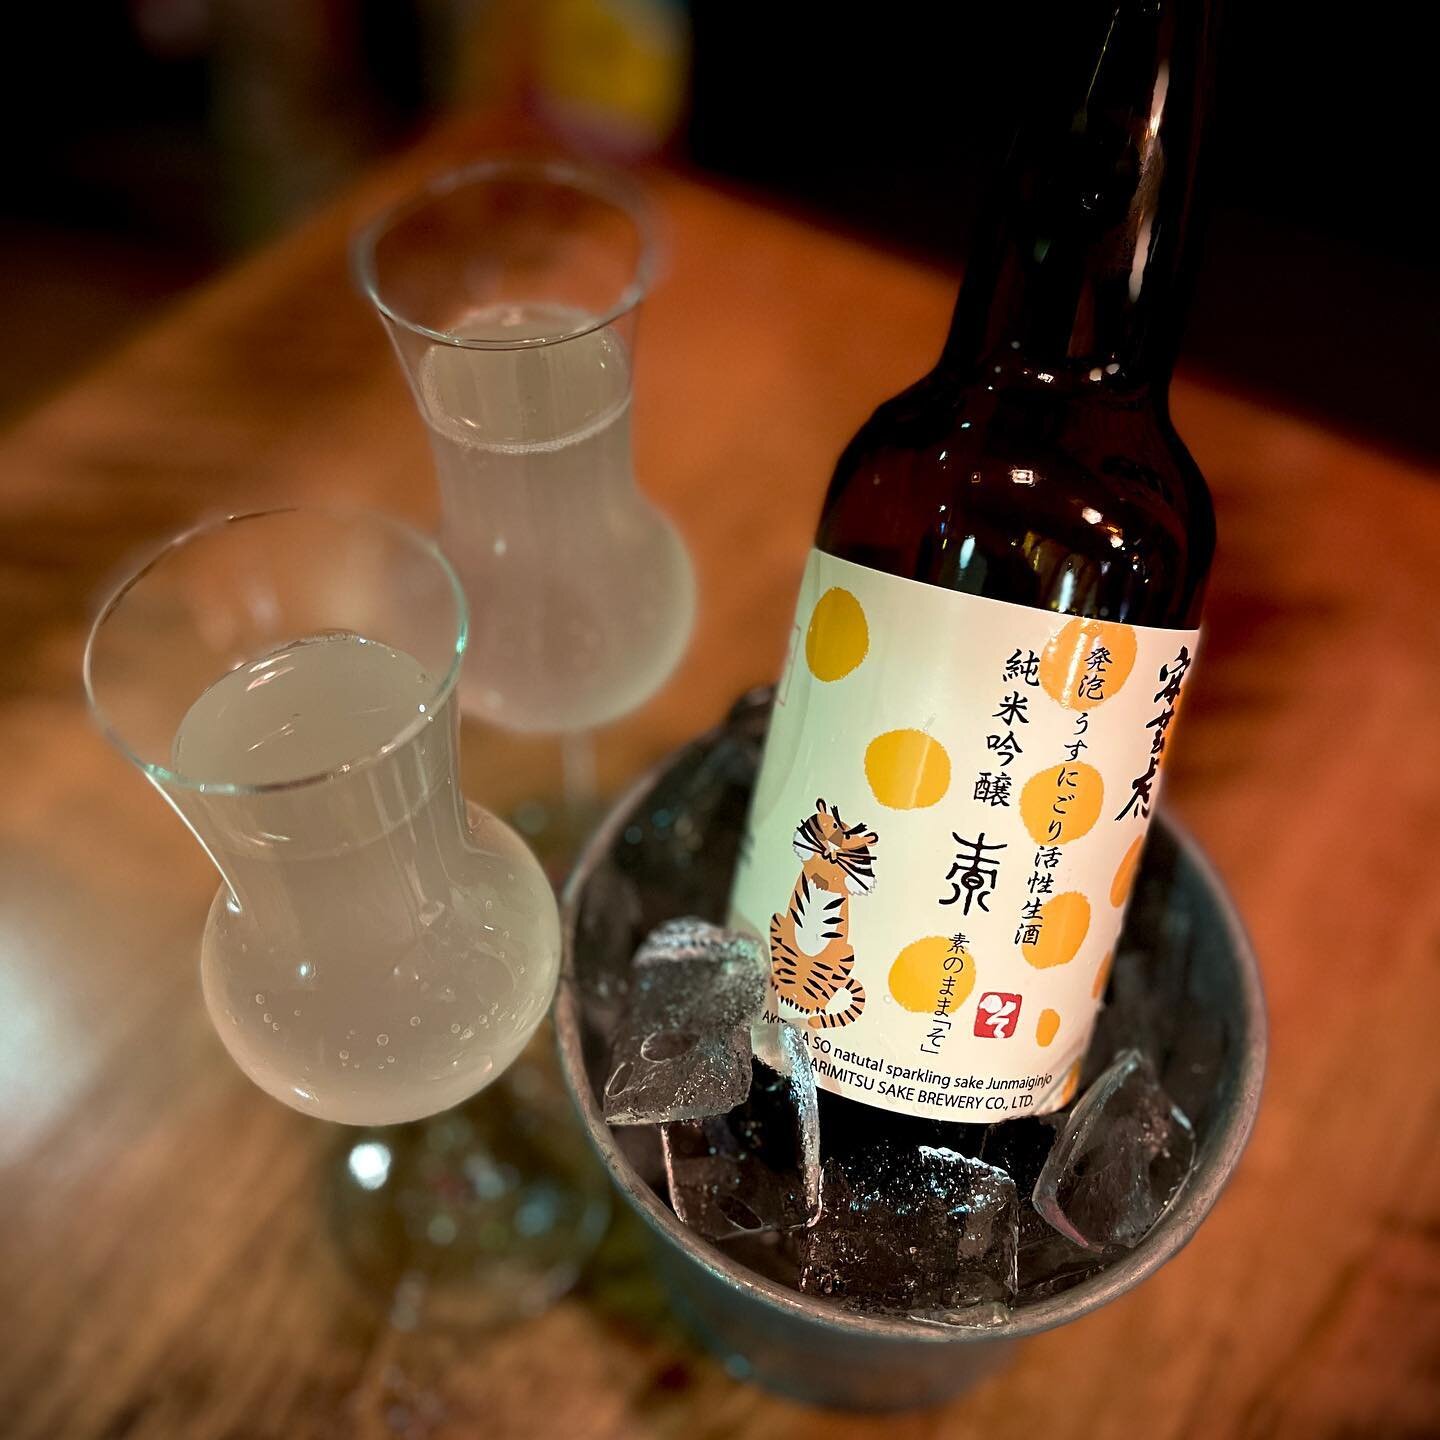 Sparkling sake that doesn&rsquo;t suck! 😱

Bubbles made in the same way as champagne (second fermentation). No forced carbonation here!
.
.
.
.
.
.
#sake #sparklingsake #sparklingsakethatdoesntsuck #japanesedrinks #torontobar #akitorasparkling #spar